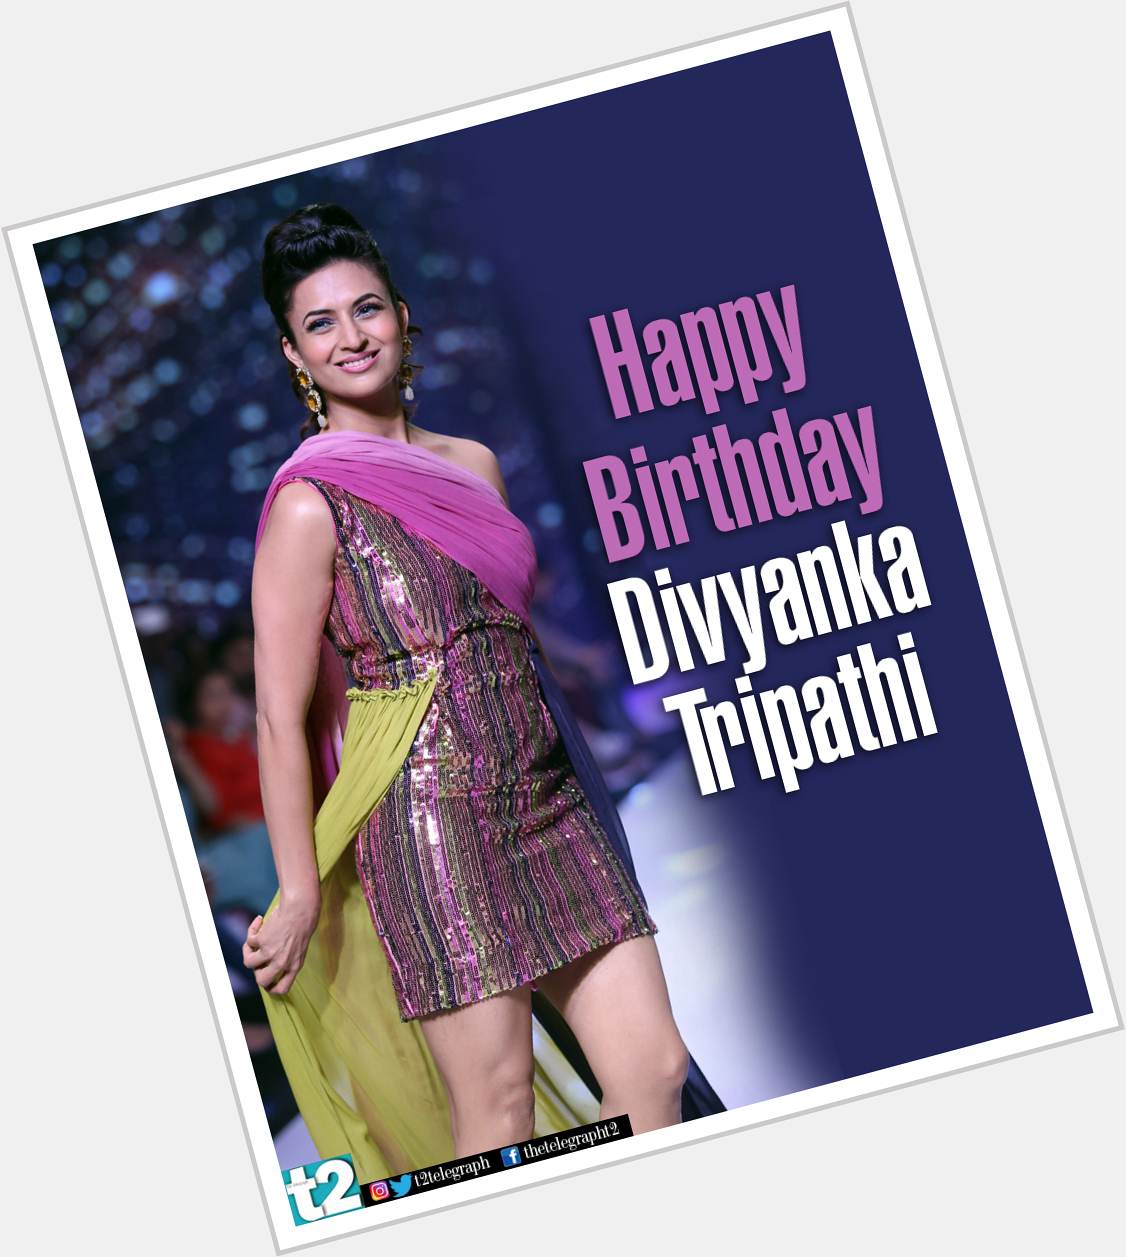 She\s the one with the gorgeous smile! t2 wishes the stunning Divyanka Tripathi a very happy birthday. 